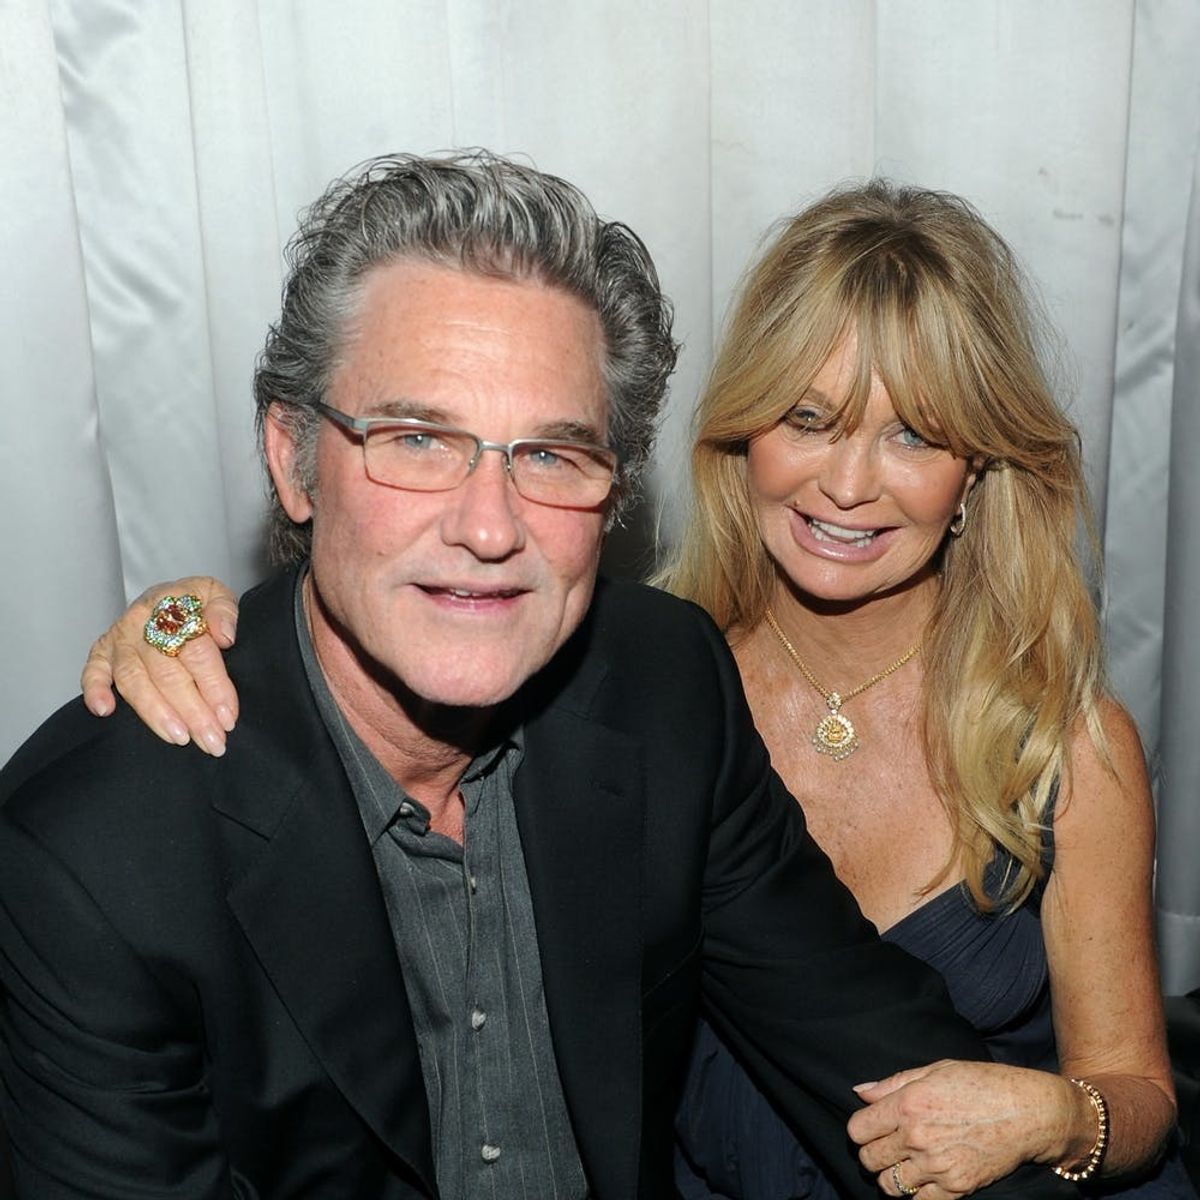 Kate Hudson’s Sweet Tribute to Kurt Russell and Goldie Hawn Will Make You Smile